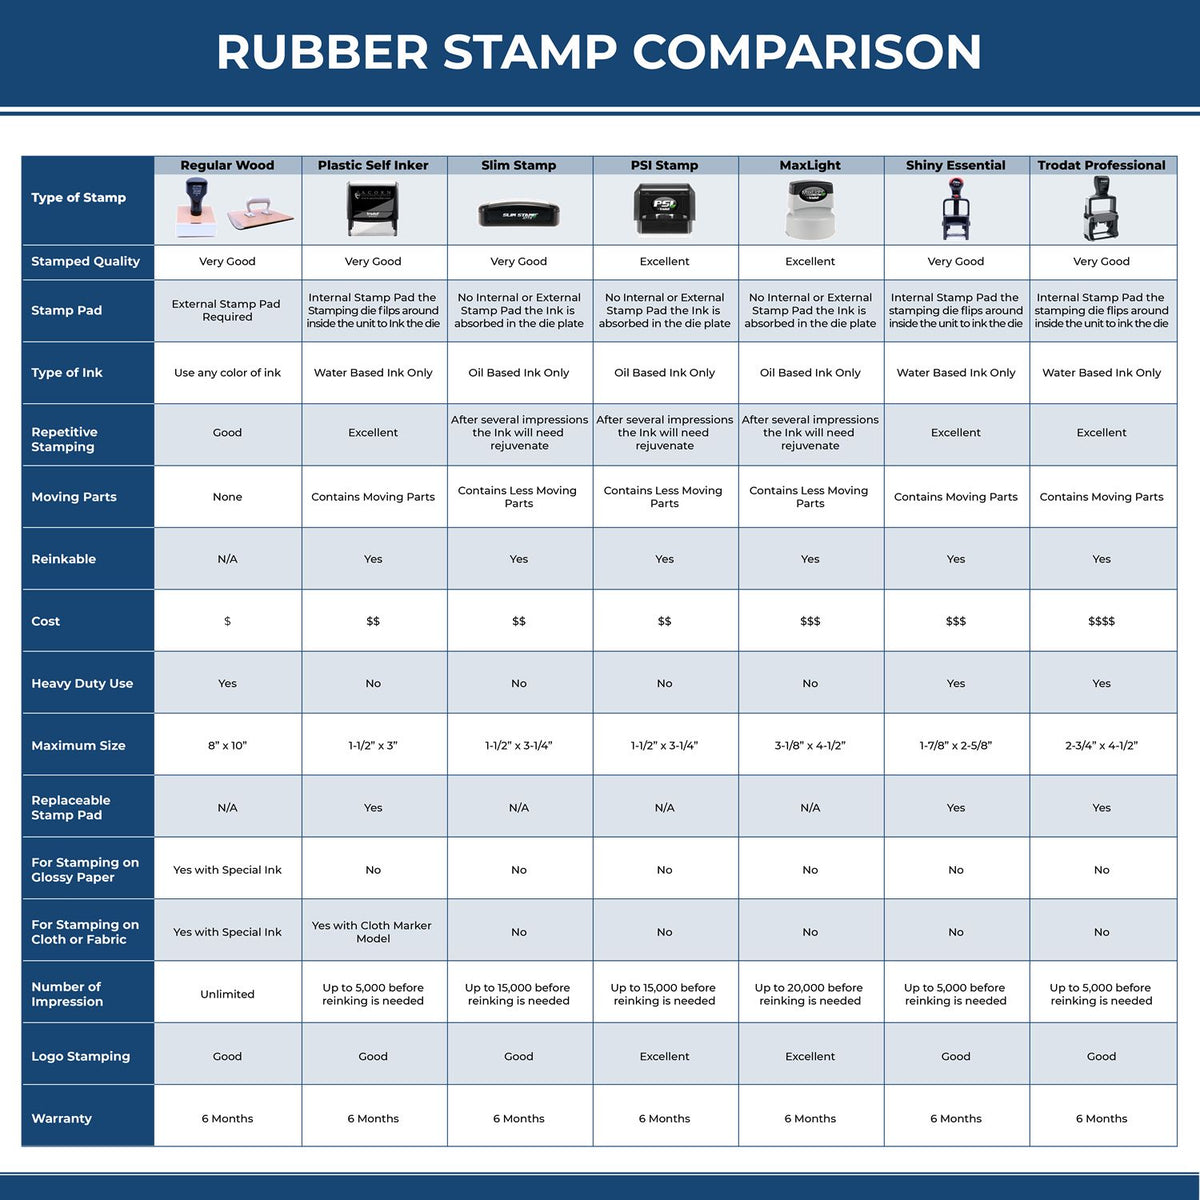 A comparison chart for the different types of mount models available for the Self-Inking New Jersey PE Stamp.